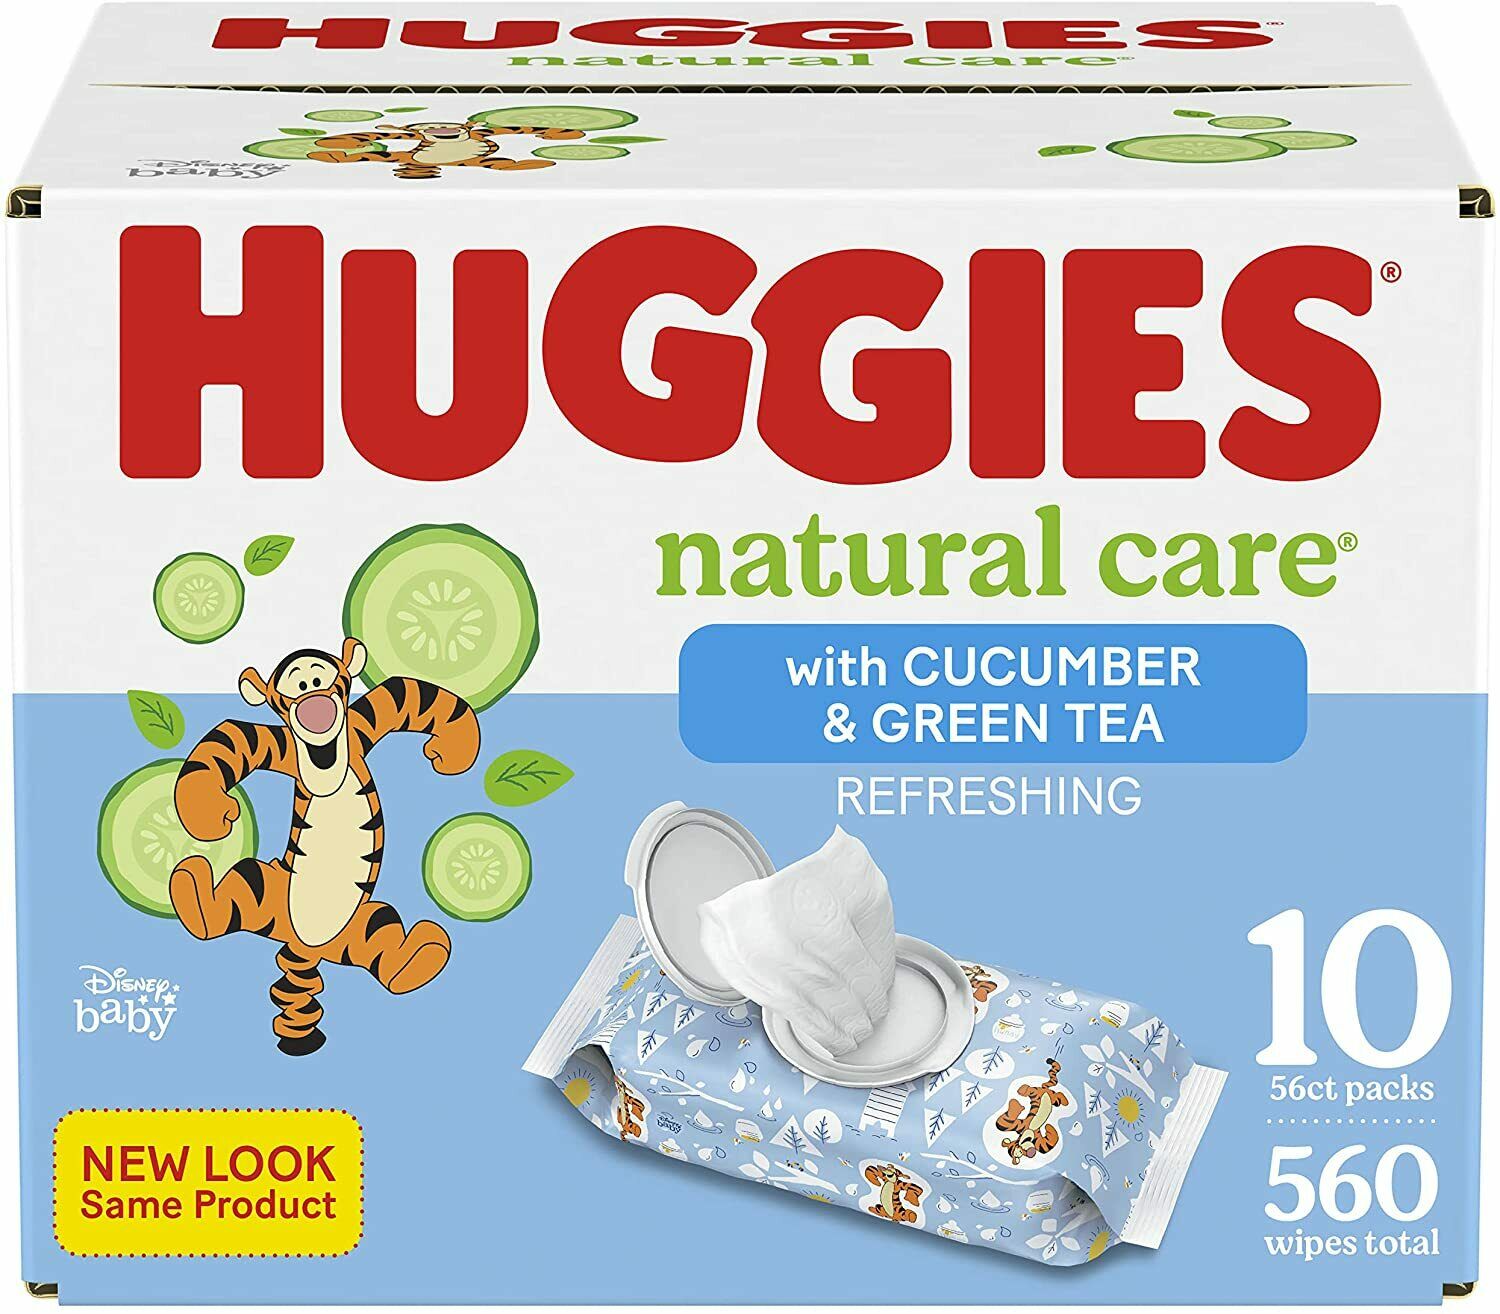 Huggies Natural Care Refreshing With Cucumber & Green Tea Scented Baby Wipes ✅